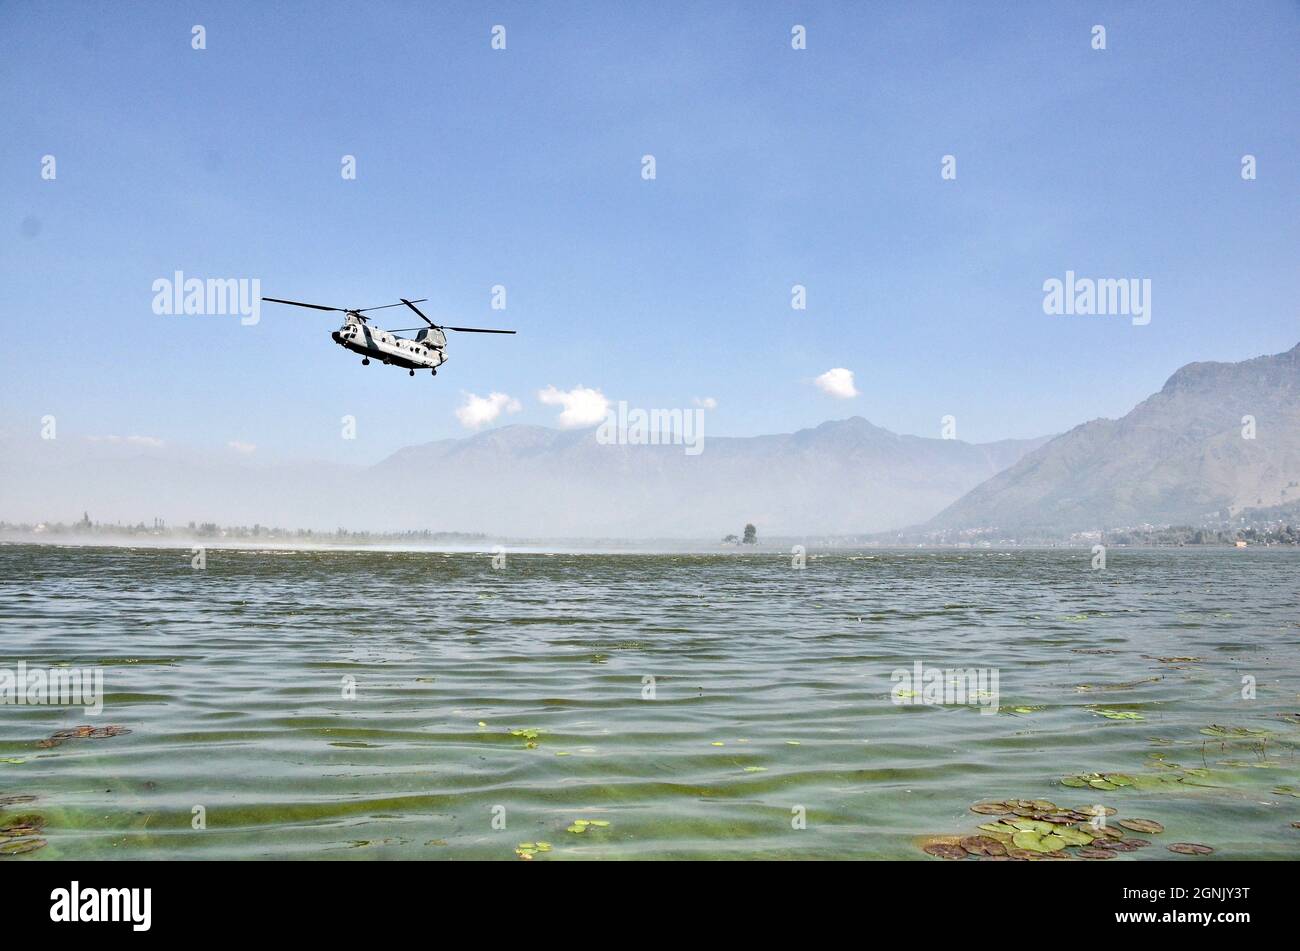 Indian Air Force (IAF) Chinook helicopter flies over the Dal lake during an air show conducted by Indian Air Force (IAF) in Srinagar. After a gap of 13 years, Indian Air Force (IAF) conducted an Air Show over the world famous Dal Lake in Srinagar, an official said.The show saw a display by the IAF’s Surya Kiran Aerobatics Team, Paramotor and powered hang-glider display, fly past MiG-21 Bison, aerobatics by Su-30 Aircraft. It also included Akashganga skydiving display. (Photo by Saqib Majeed / SOPA Images/Sipa USA) Stock Photo